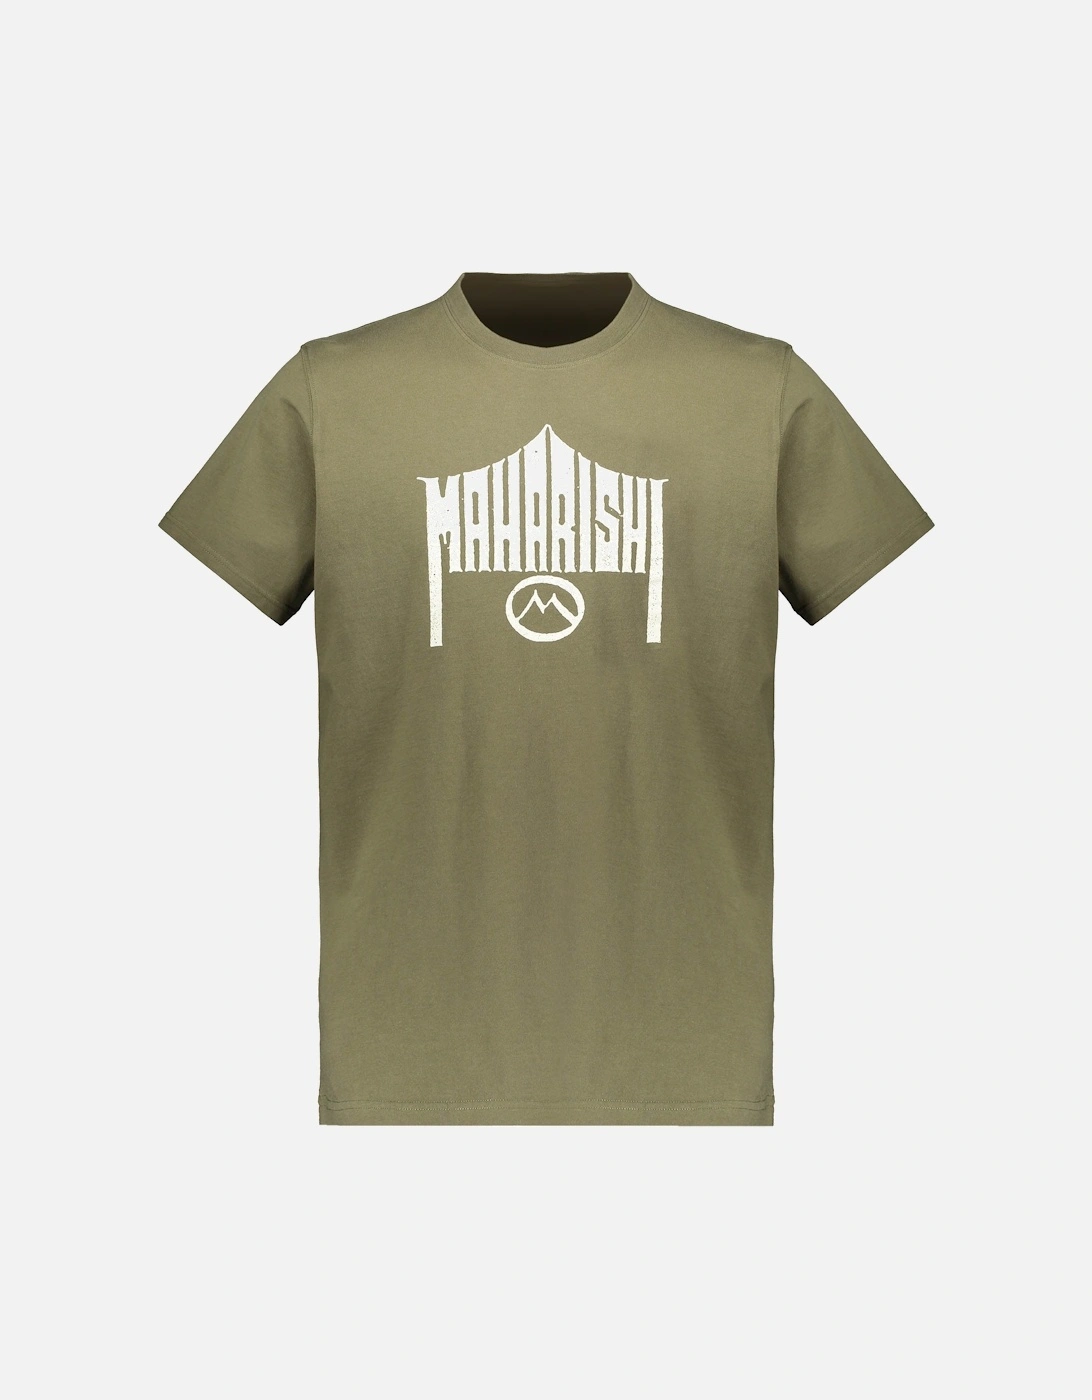 Temple Kay-One Print T-Shirt - Olive, 4 of 3